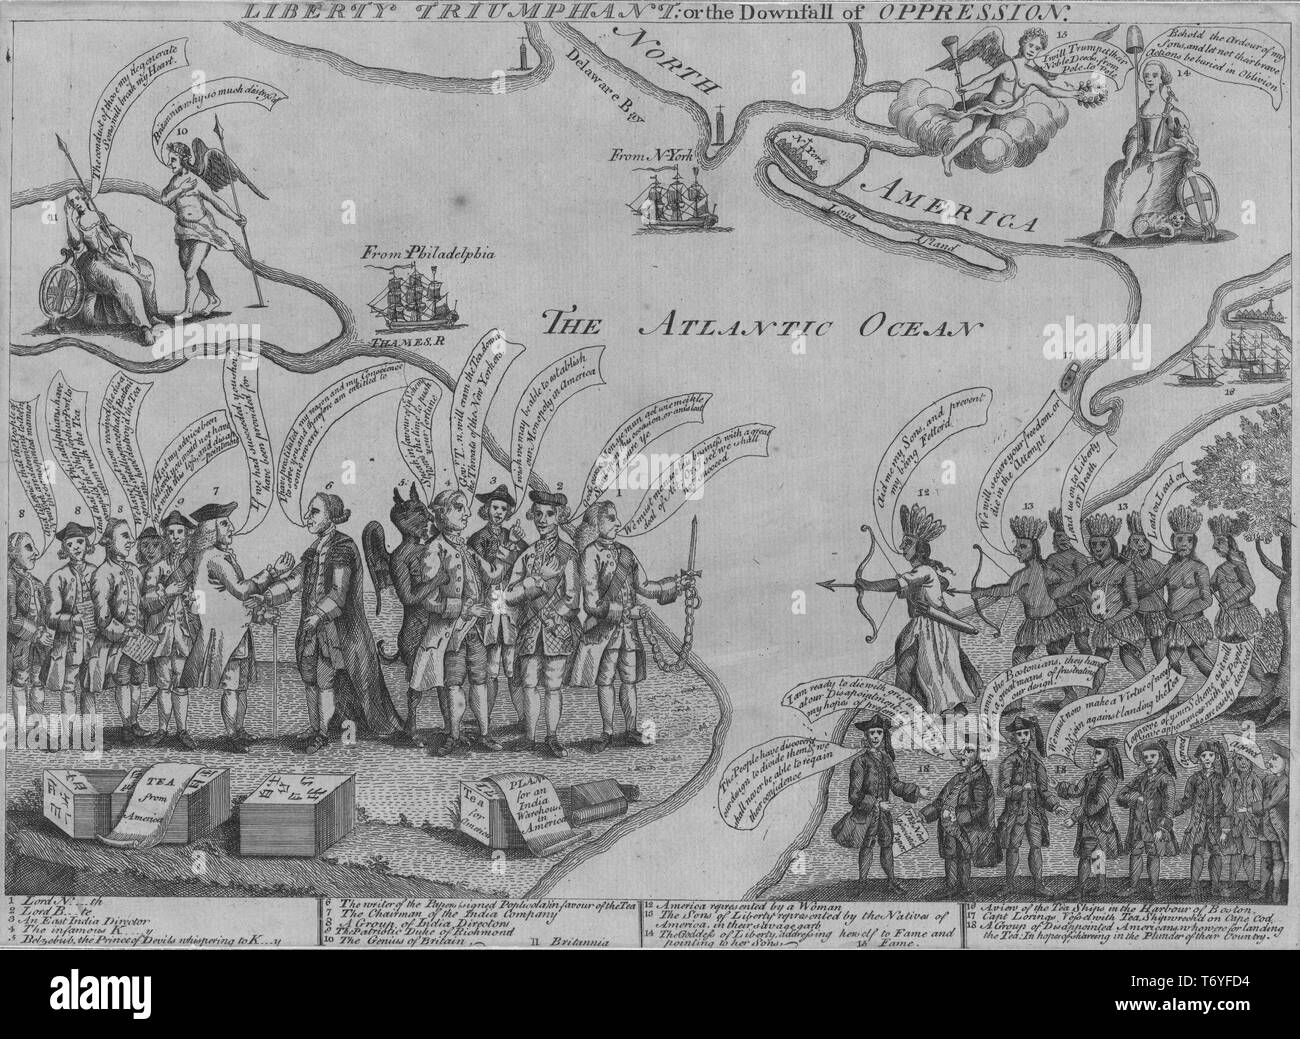 Engraved illustration of the Liberty triumphant, or the downfall of oppression, England colonist's reaction to the British tea tax posed over a map of the northern and mid-Atlantic colonies, by Henry Dawkins, 1775. From the New York Public Library. () Stock Photo